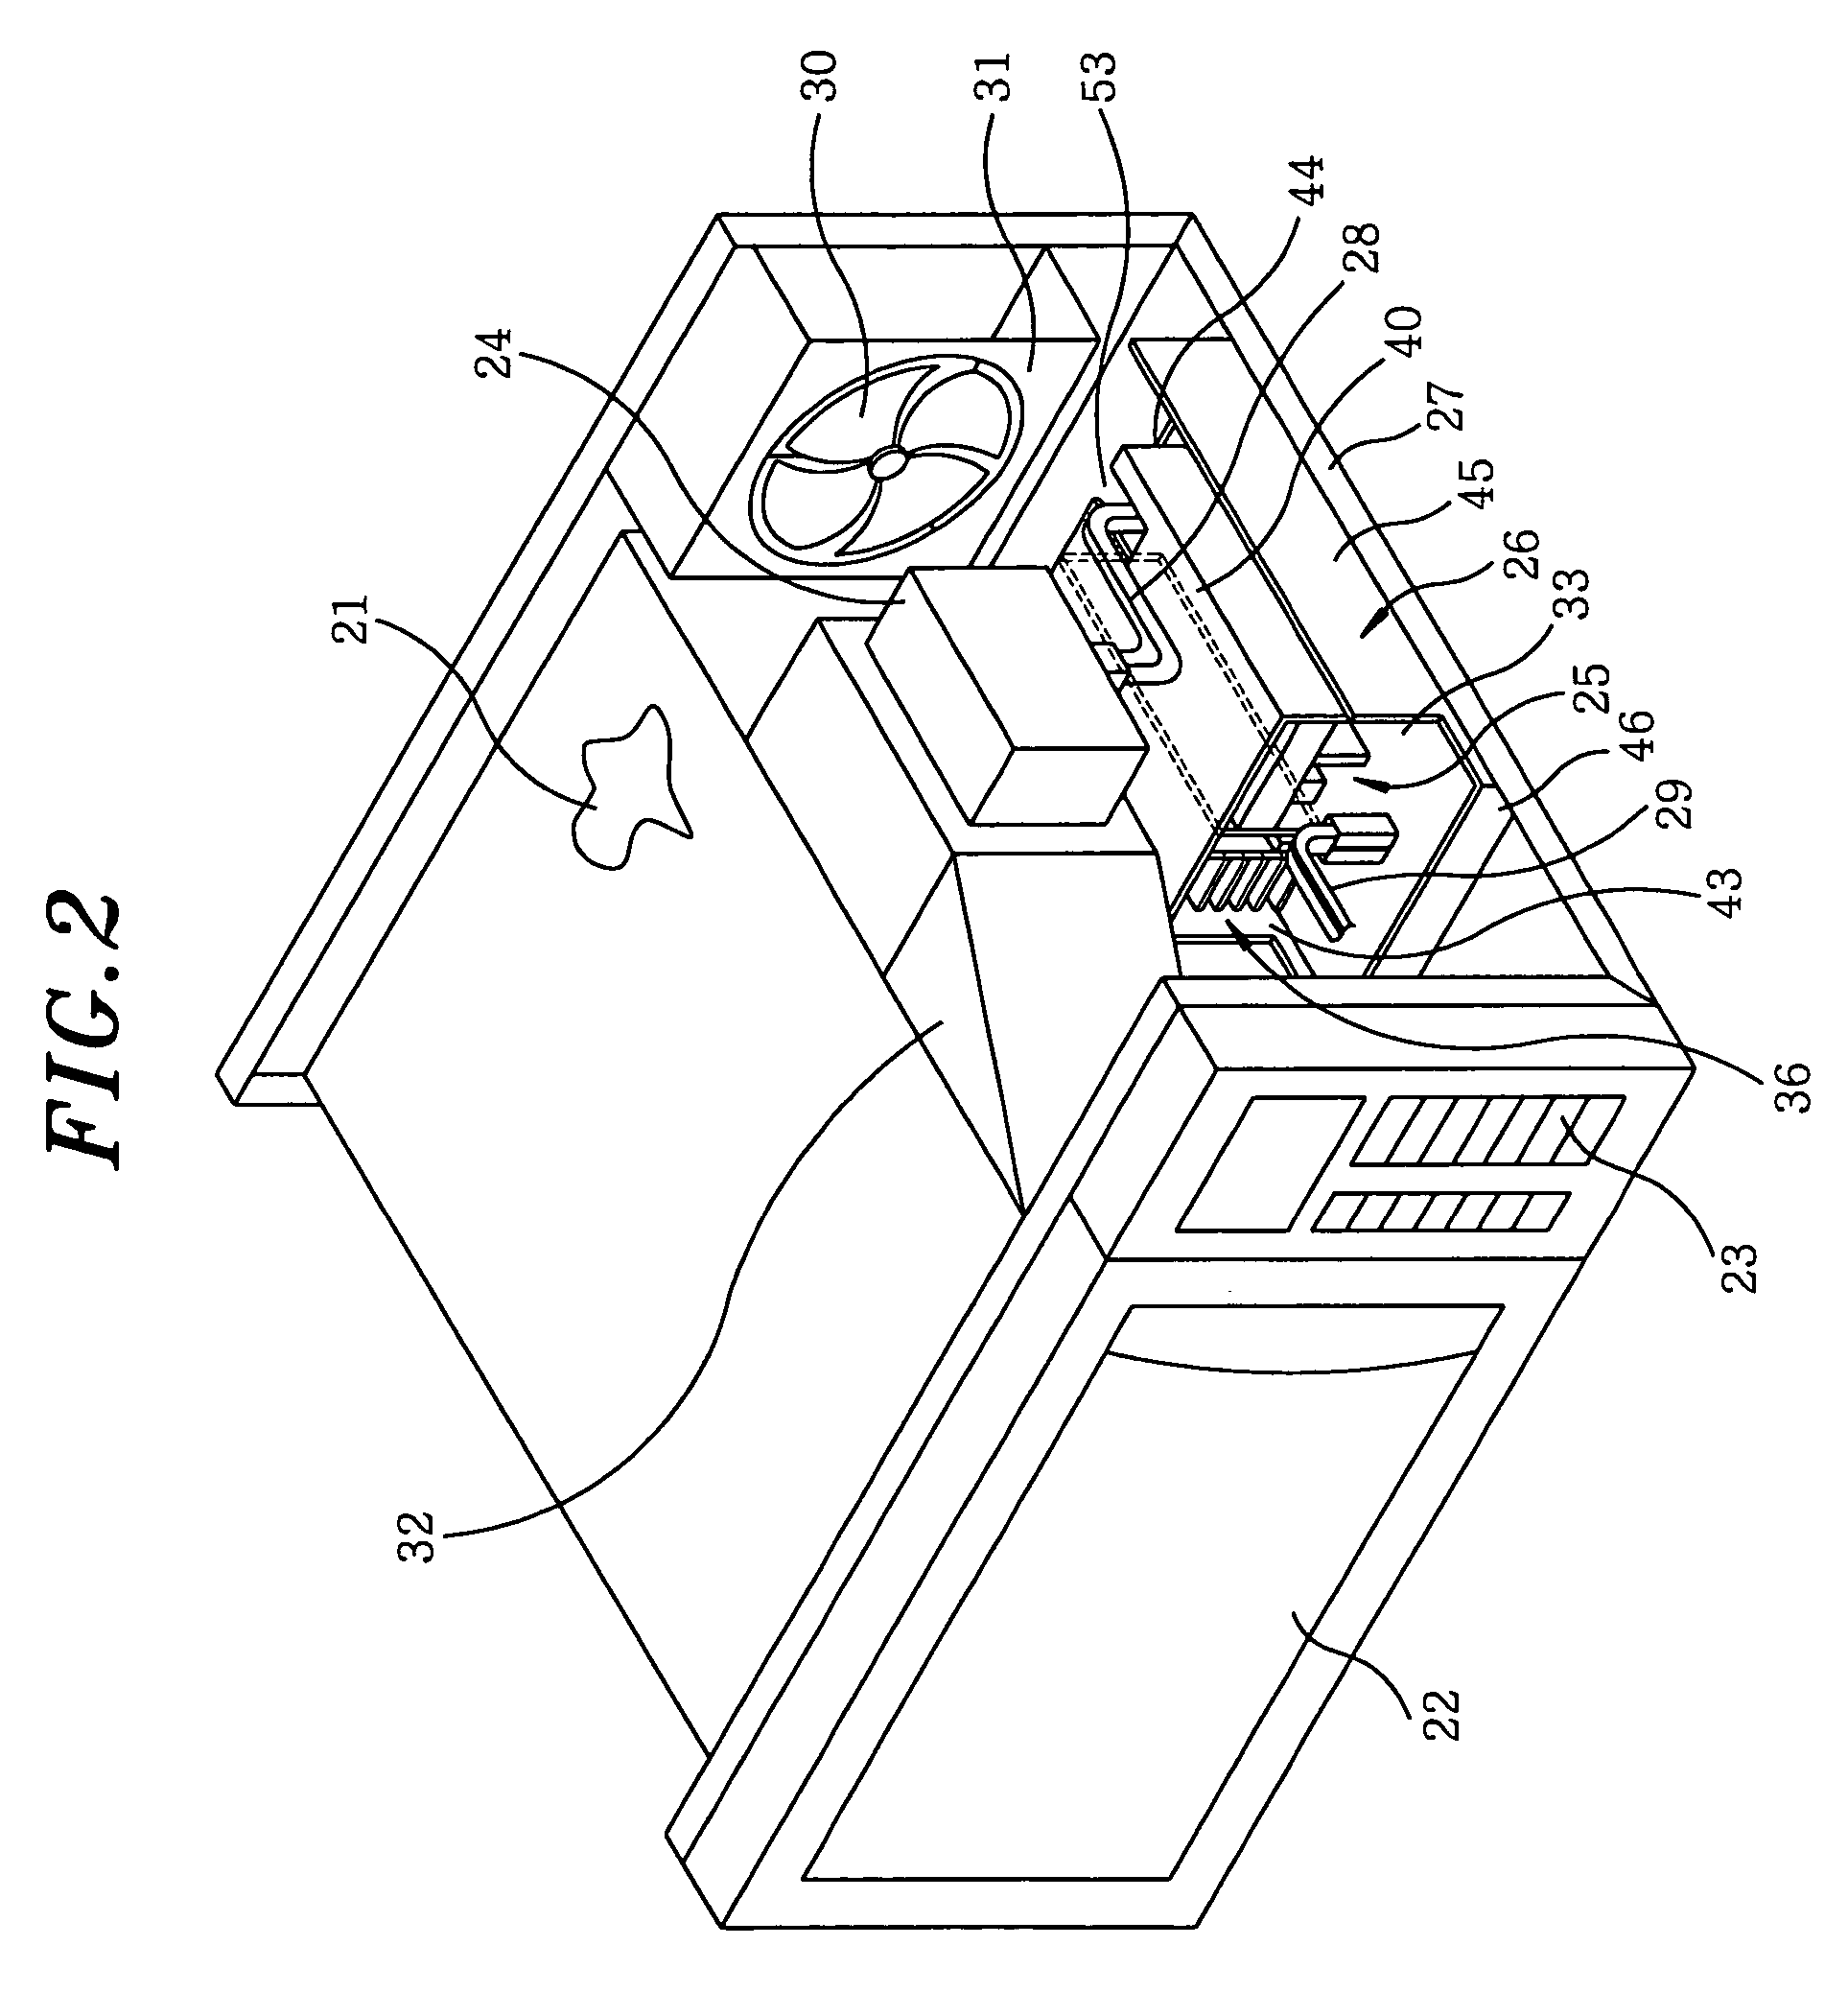 High frequency heating apparatus